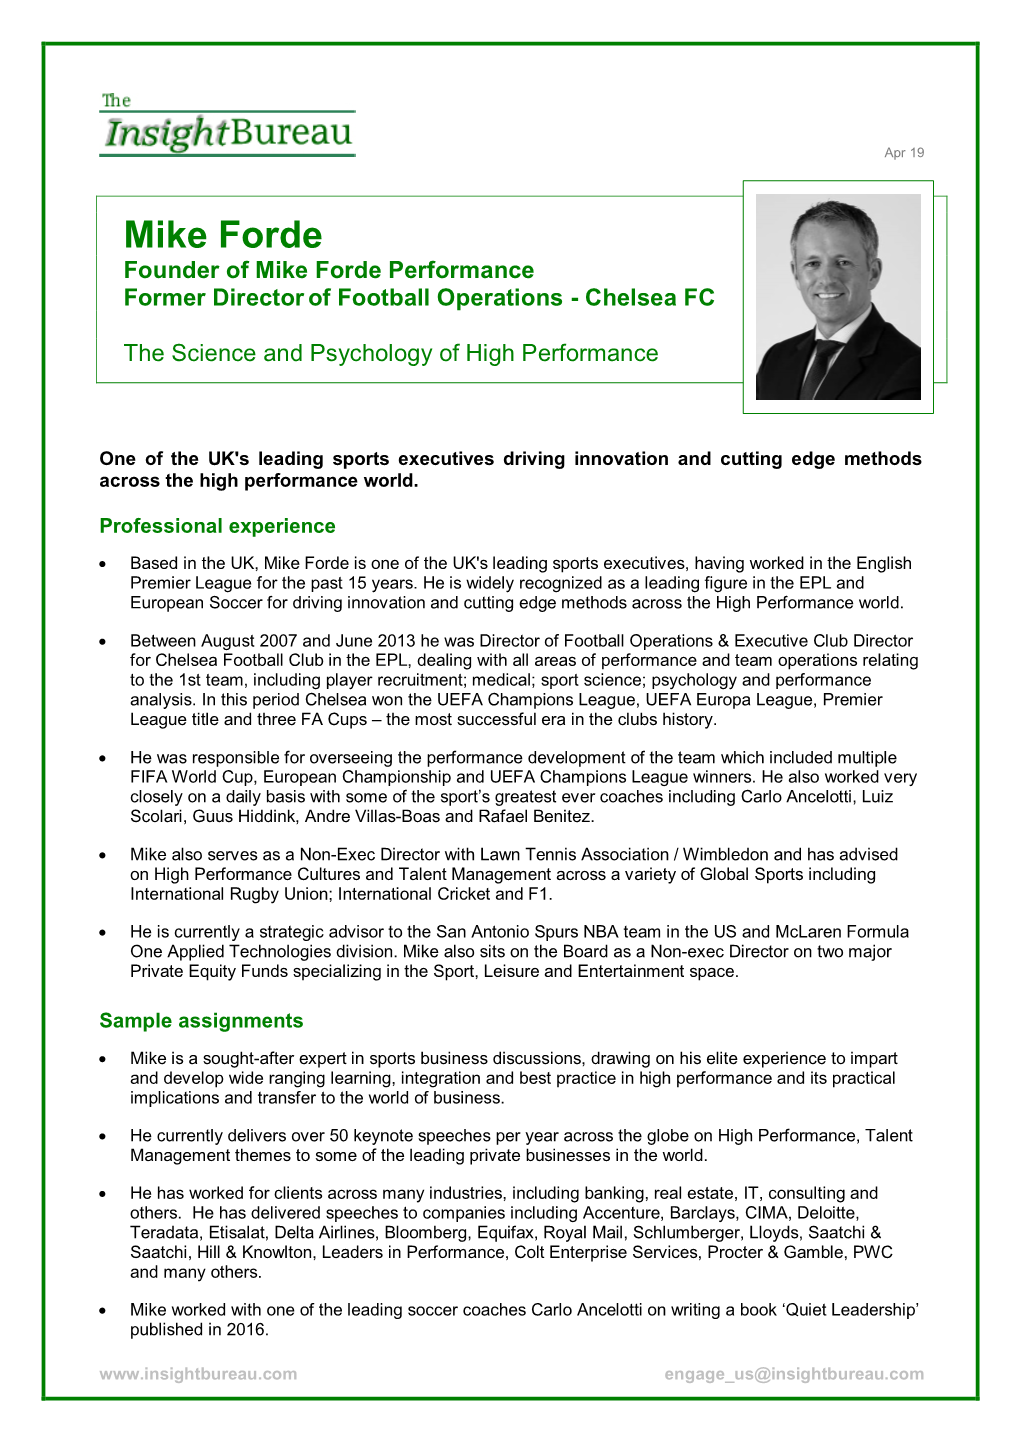 Mike Forde Founder of Mike Forde Performance Former Director of Football Operations - Chelsea FC